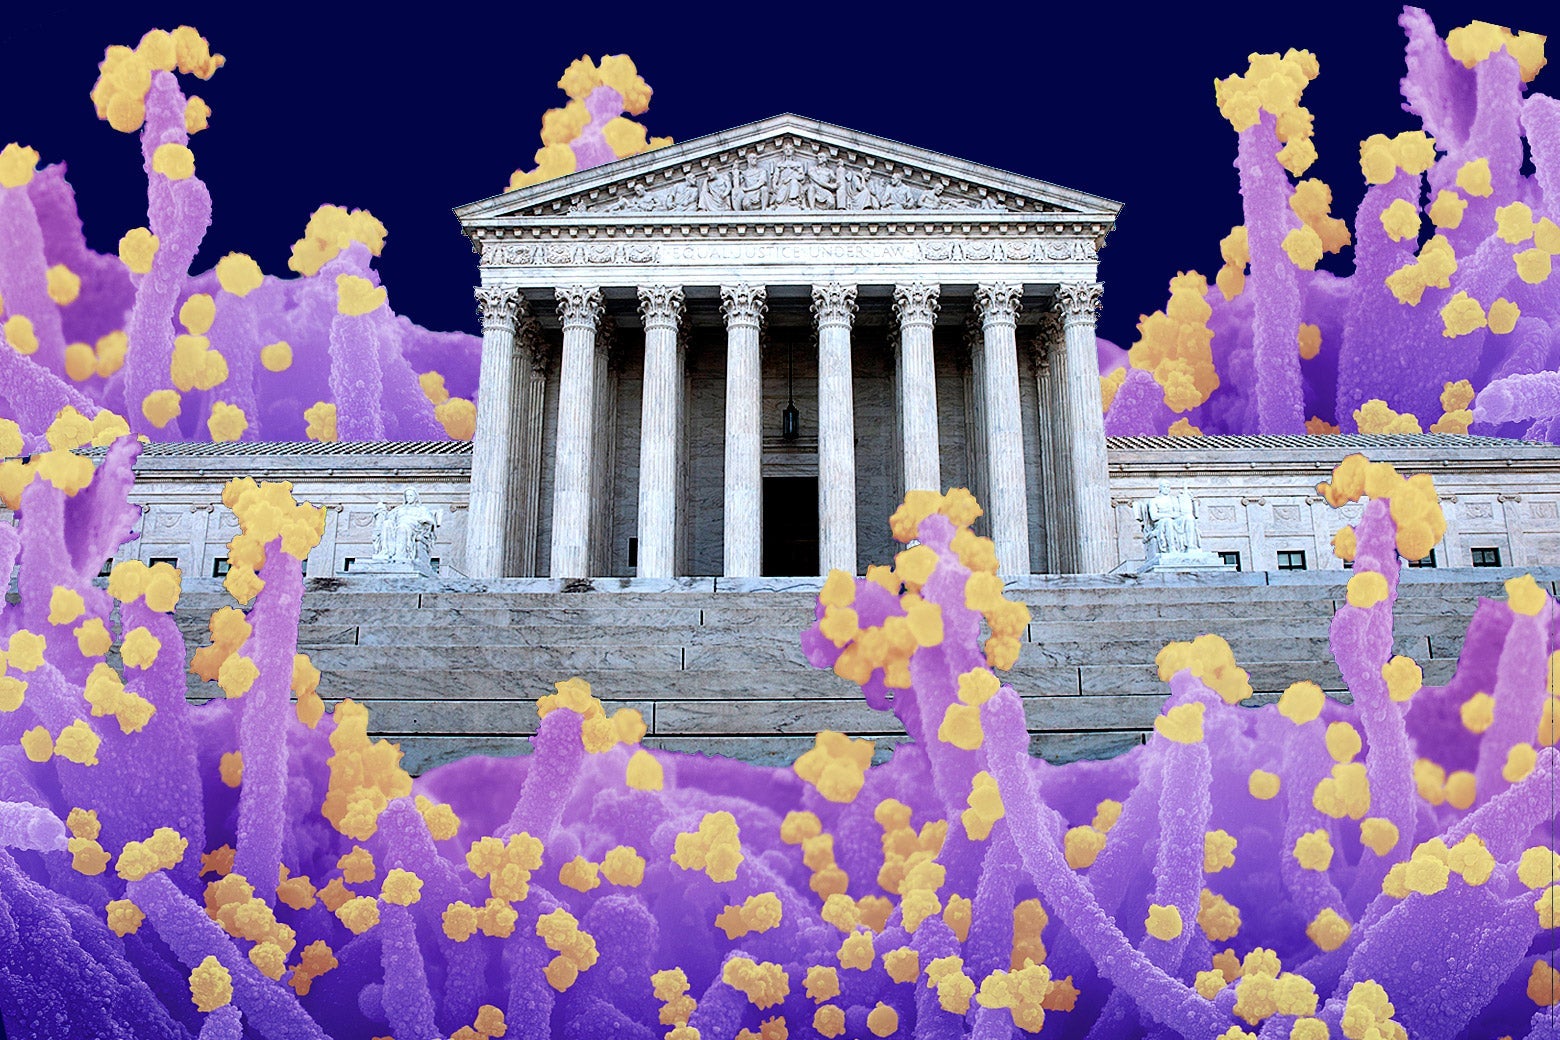 The Supreme Court building with illustrations of virus particles surrounding it.